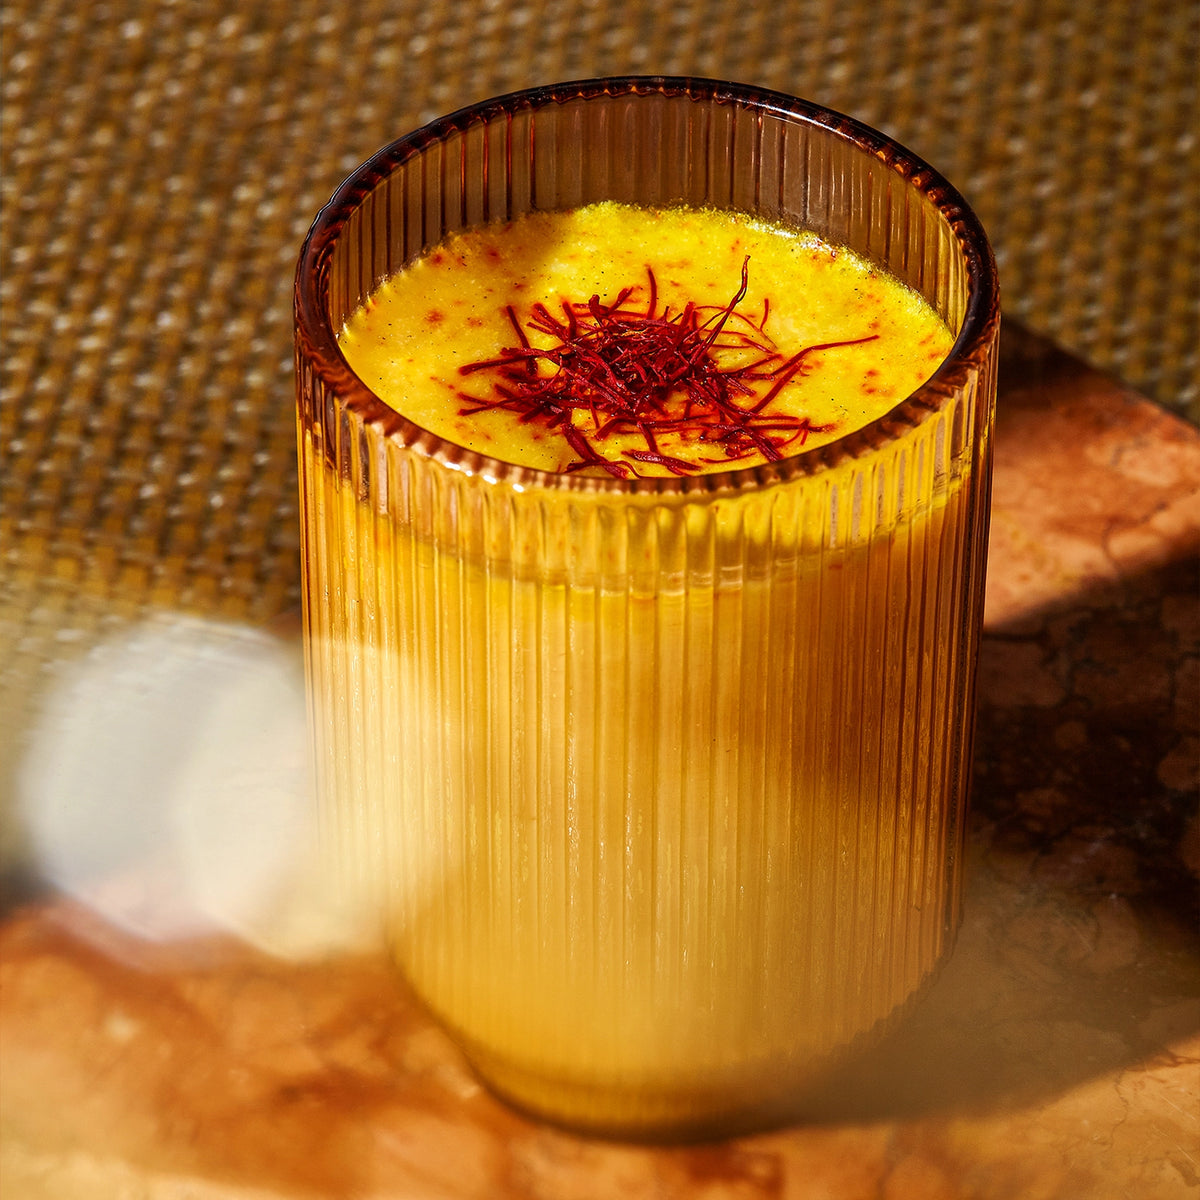 Golden-hued, caffeine-free beverage with a layer of froth and garnished with red strands of saffron, served in a ribbed glass, known to improve mood. Try THE FULLEST&#39;s Warm Feelings Sachet.